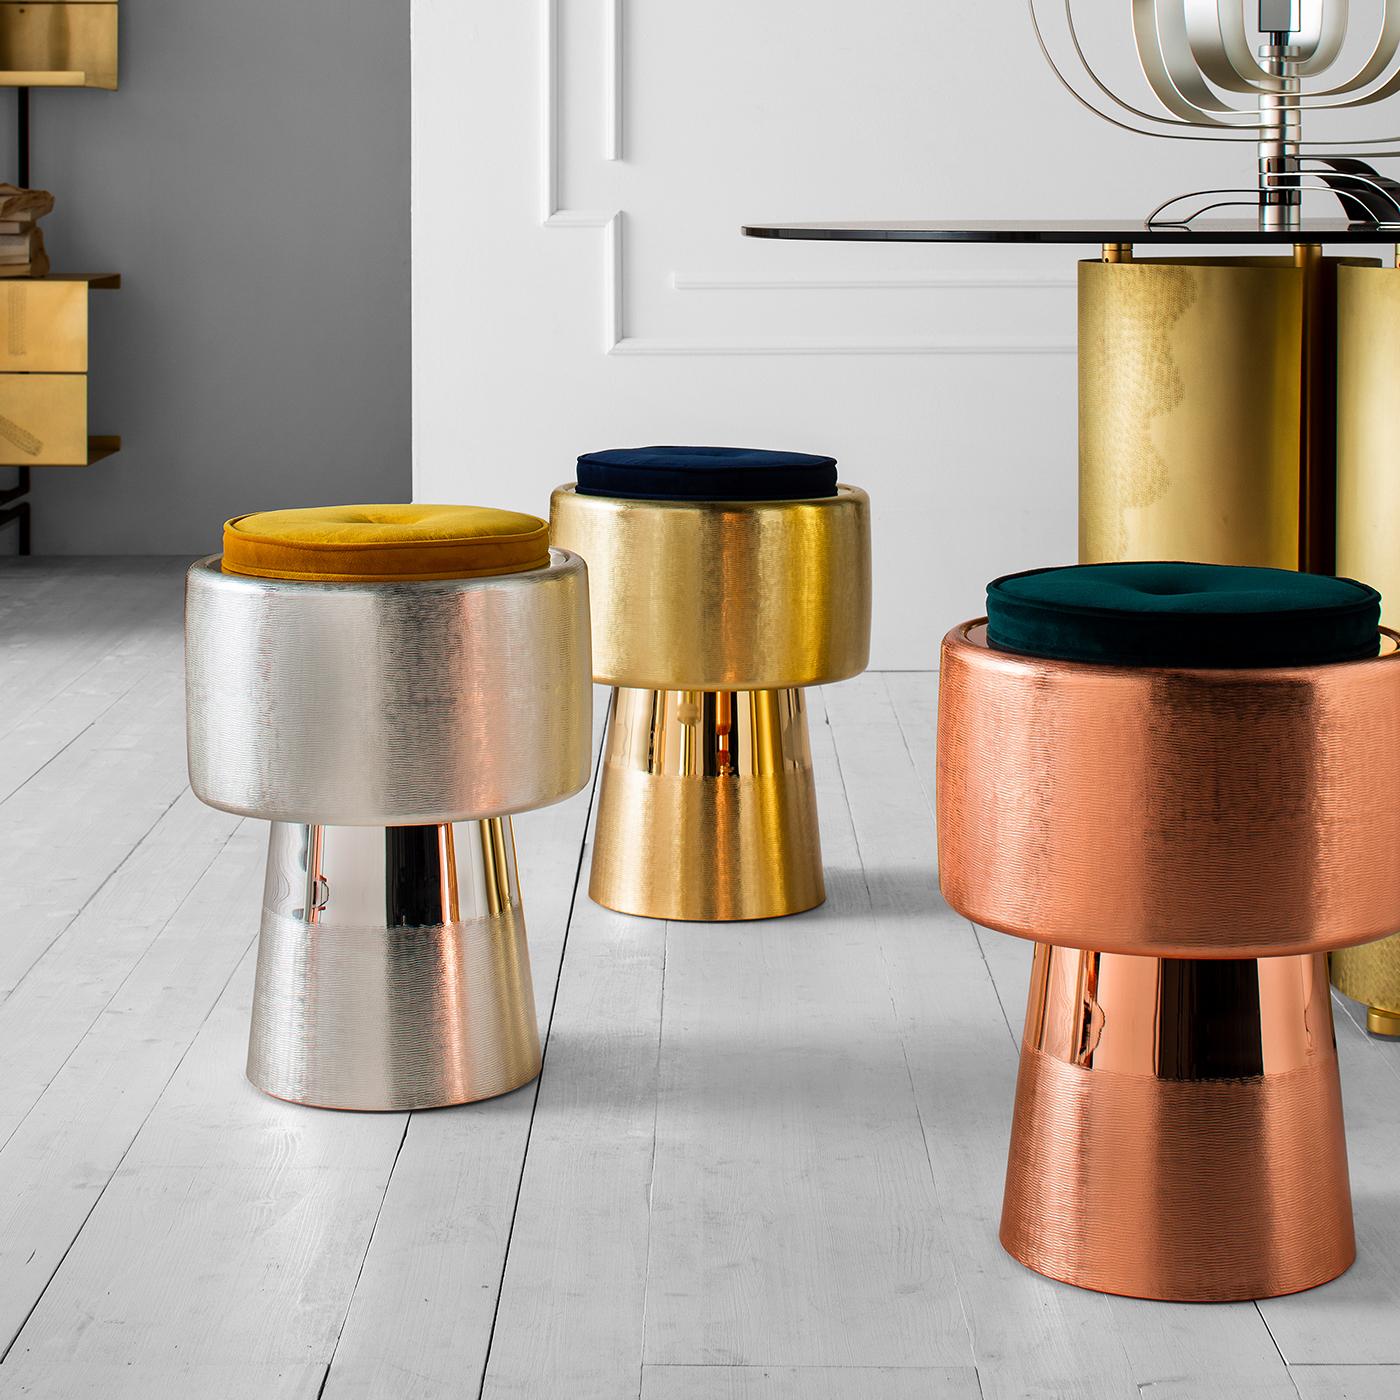 Exuding a refined and sophisticated allure, this stool features a cork shape (from which it takes its name) made of a shiny, brushed copper, and a soft navy blue velvet seat. This original and plush design can also be used as a practical and